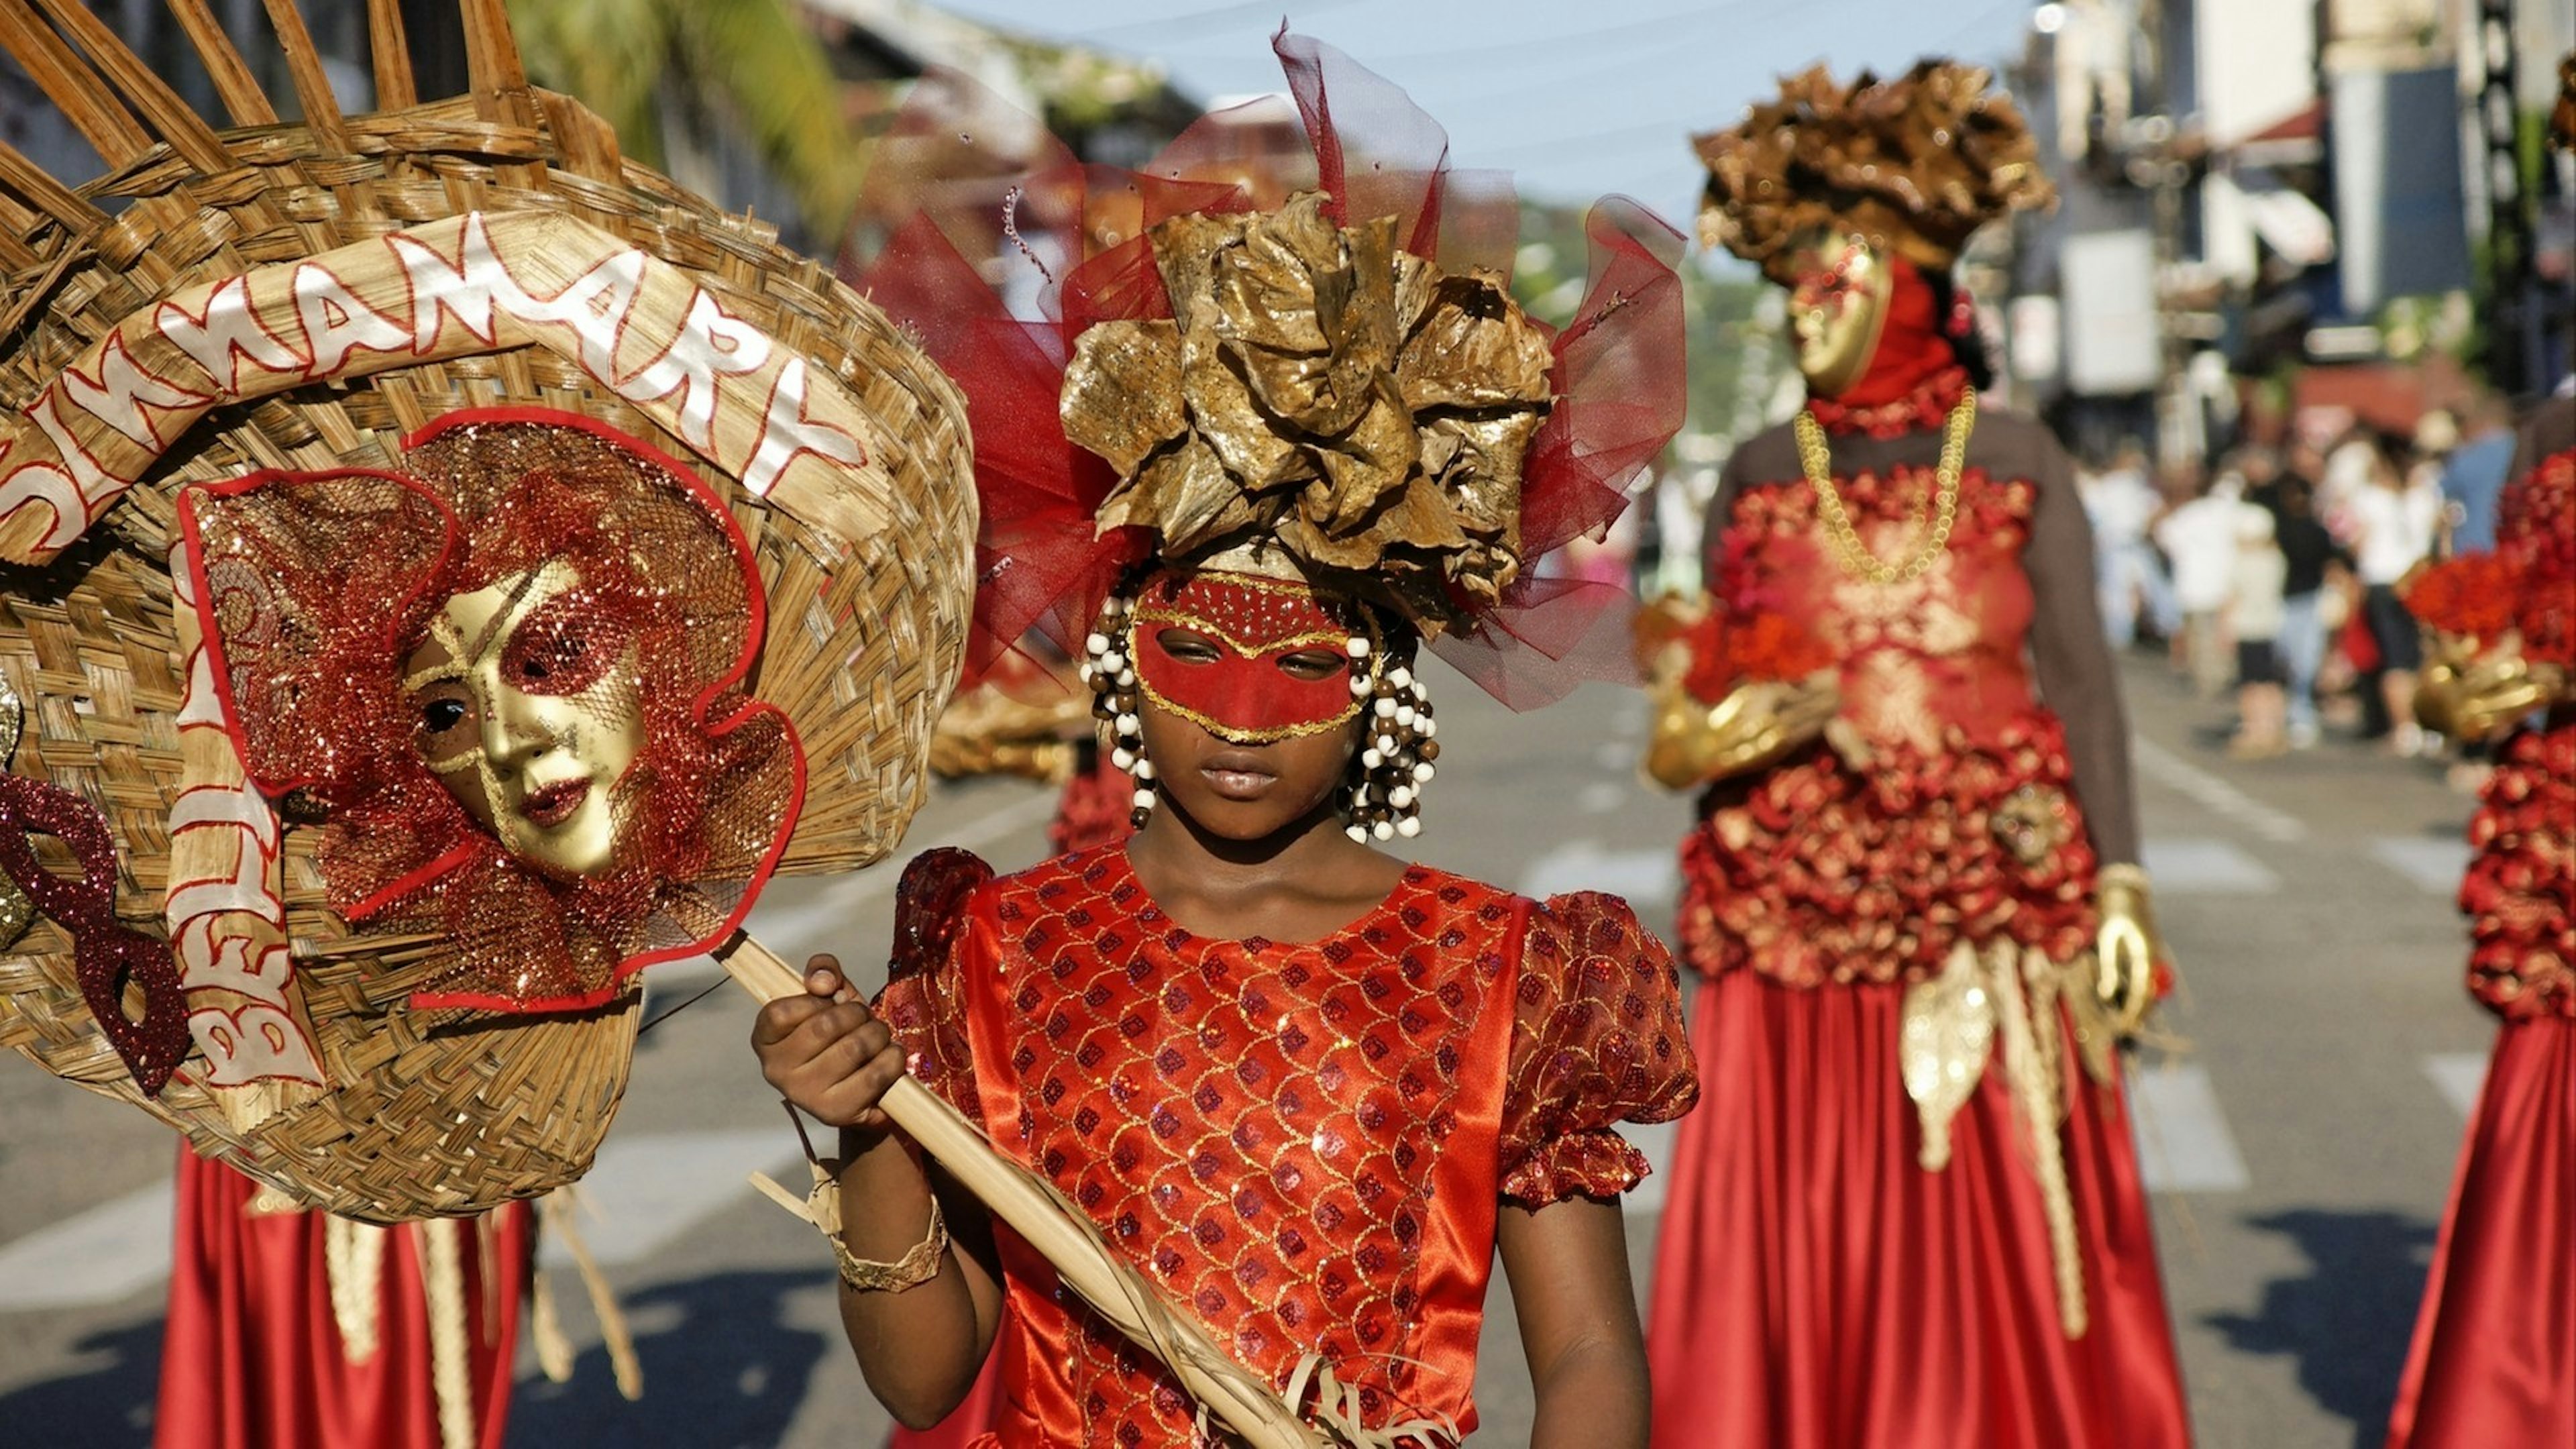 Many children participated in the French Guiana's Annual Carnival on February 14, 2010 in Cayenne, French Guiana